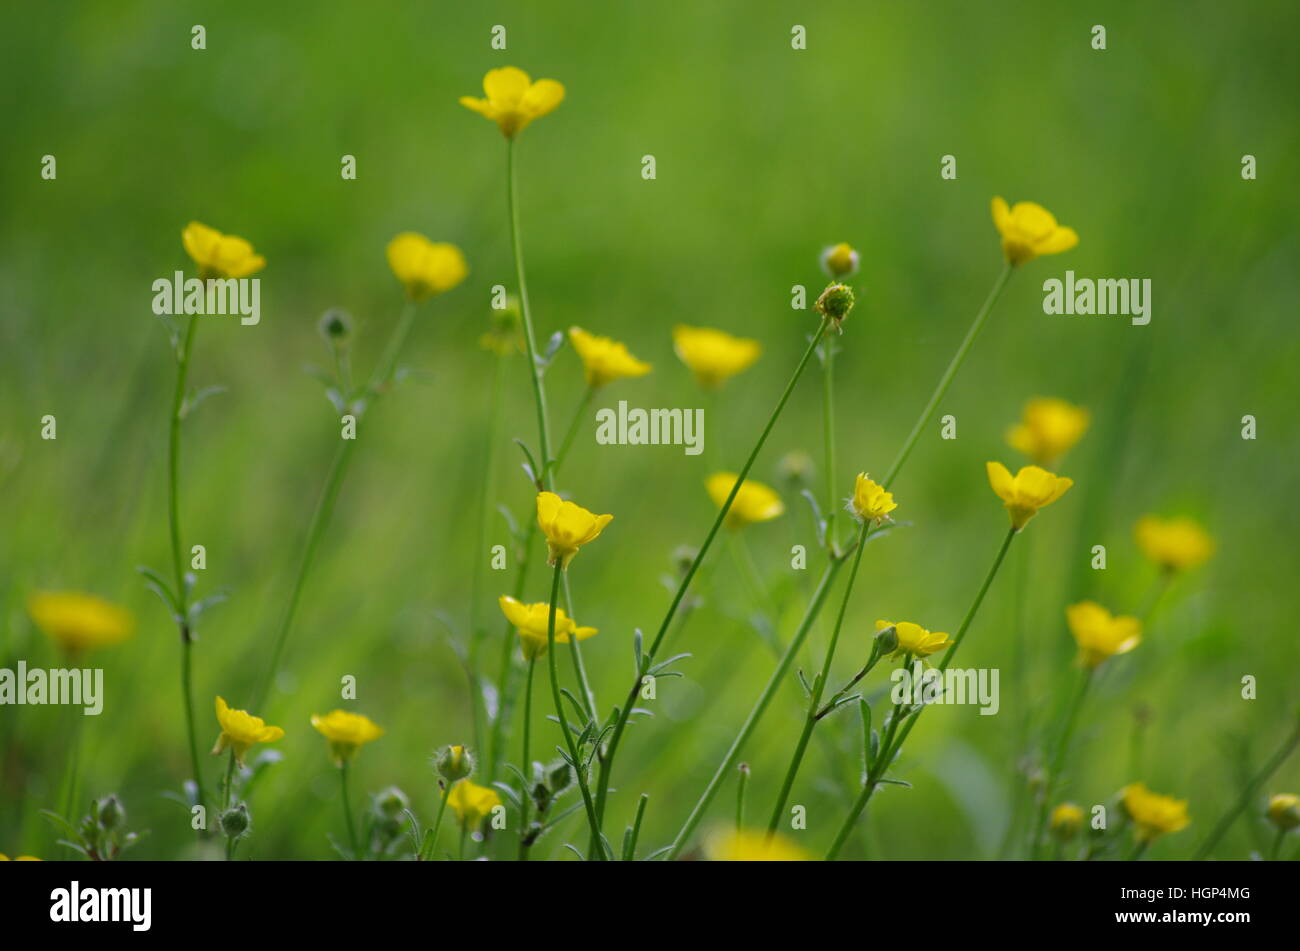 Bright yellow small buttercup flowers with green stems and buds blurry background Stock Photo